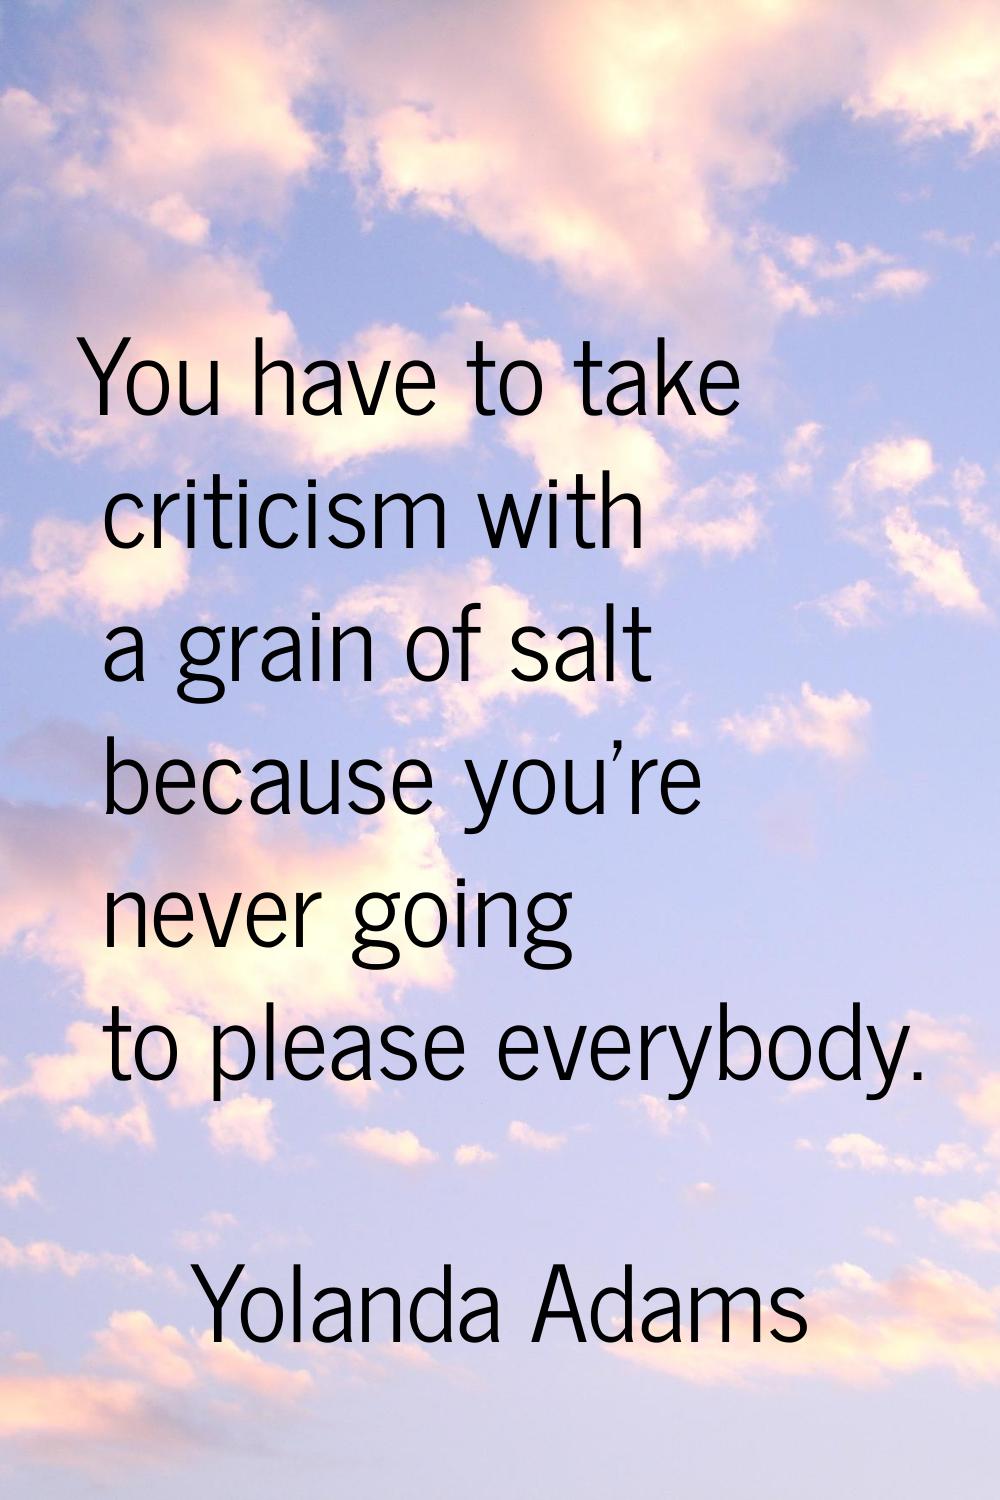 You have to take criticism with a grain of salt because you're never going to please everybody.